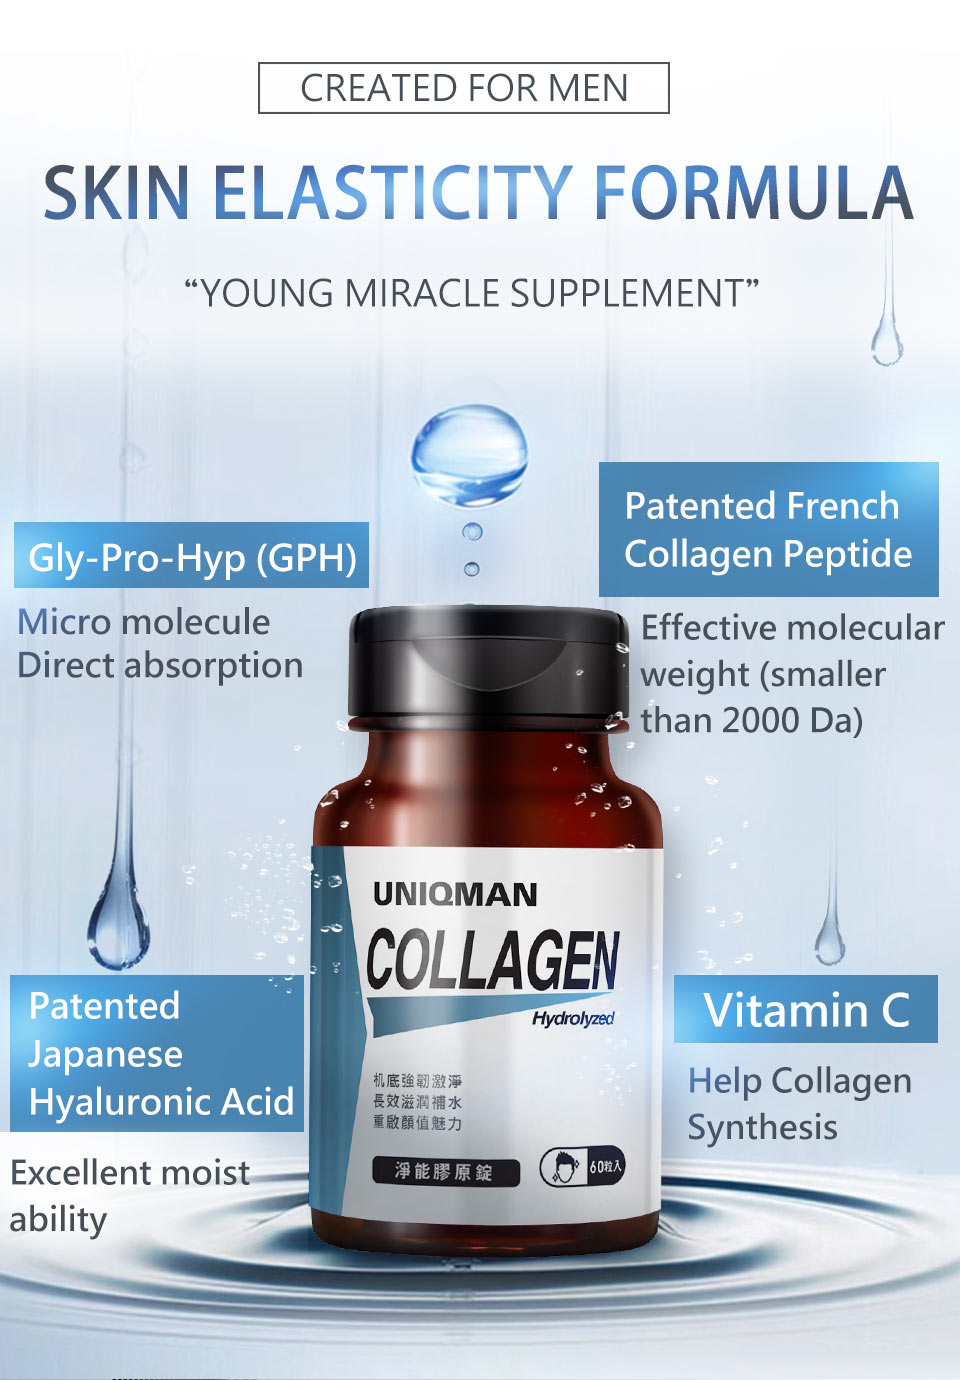 Highly recommend to over 25 year old men, UNIQMAN Collagen helps skin smooth 